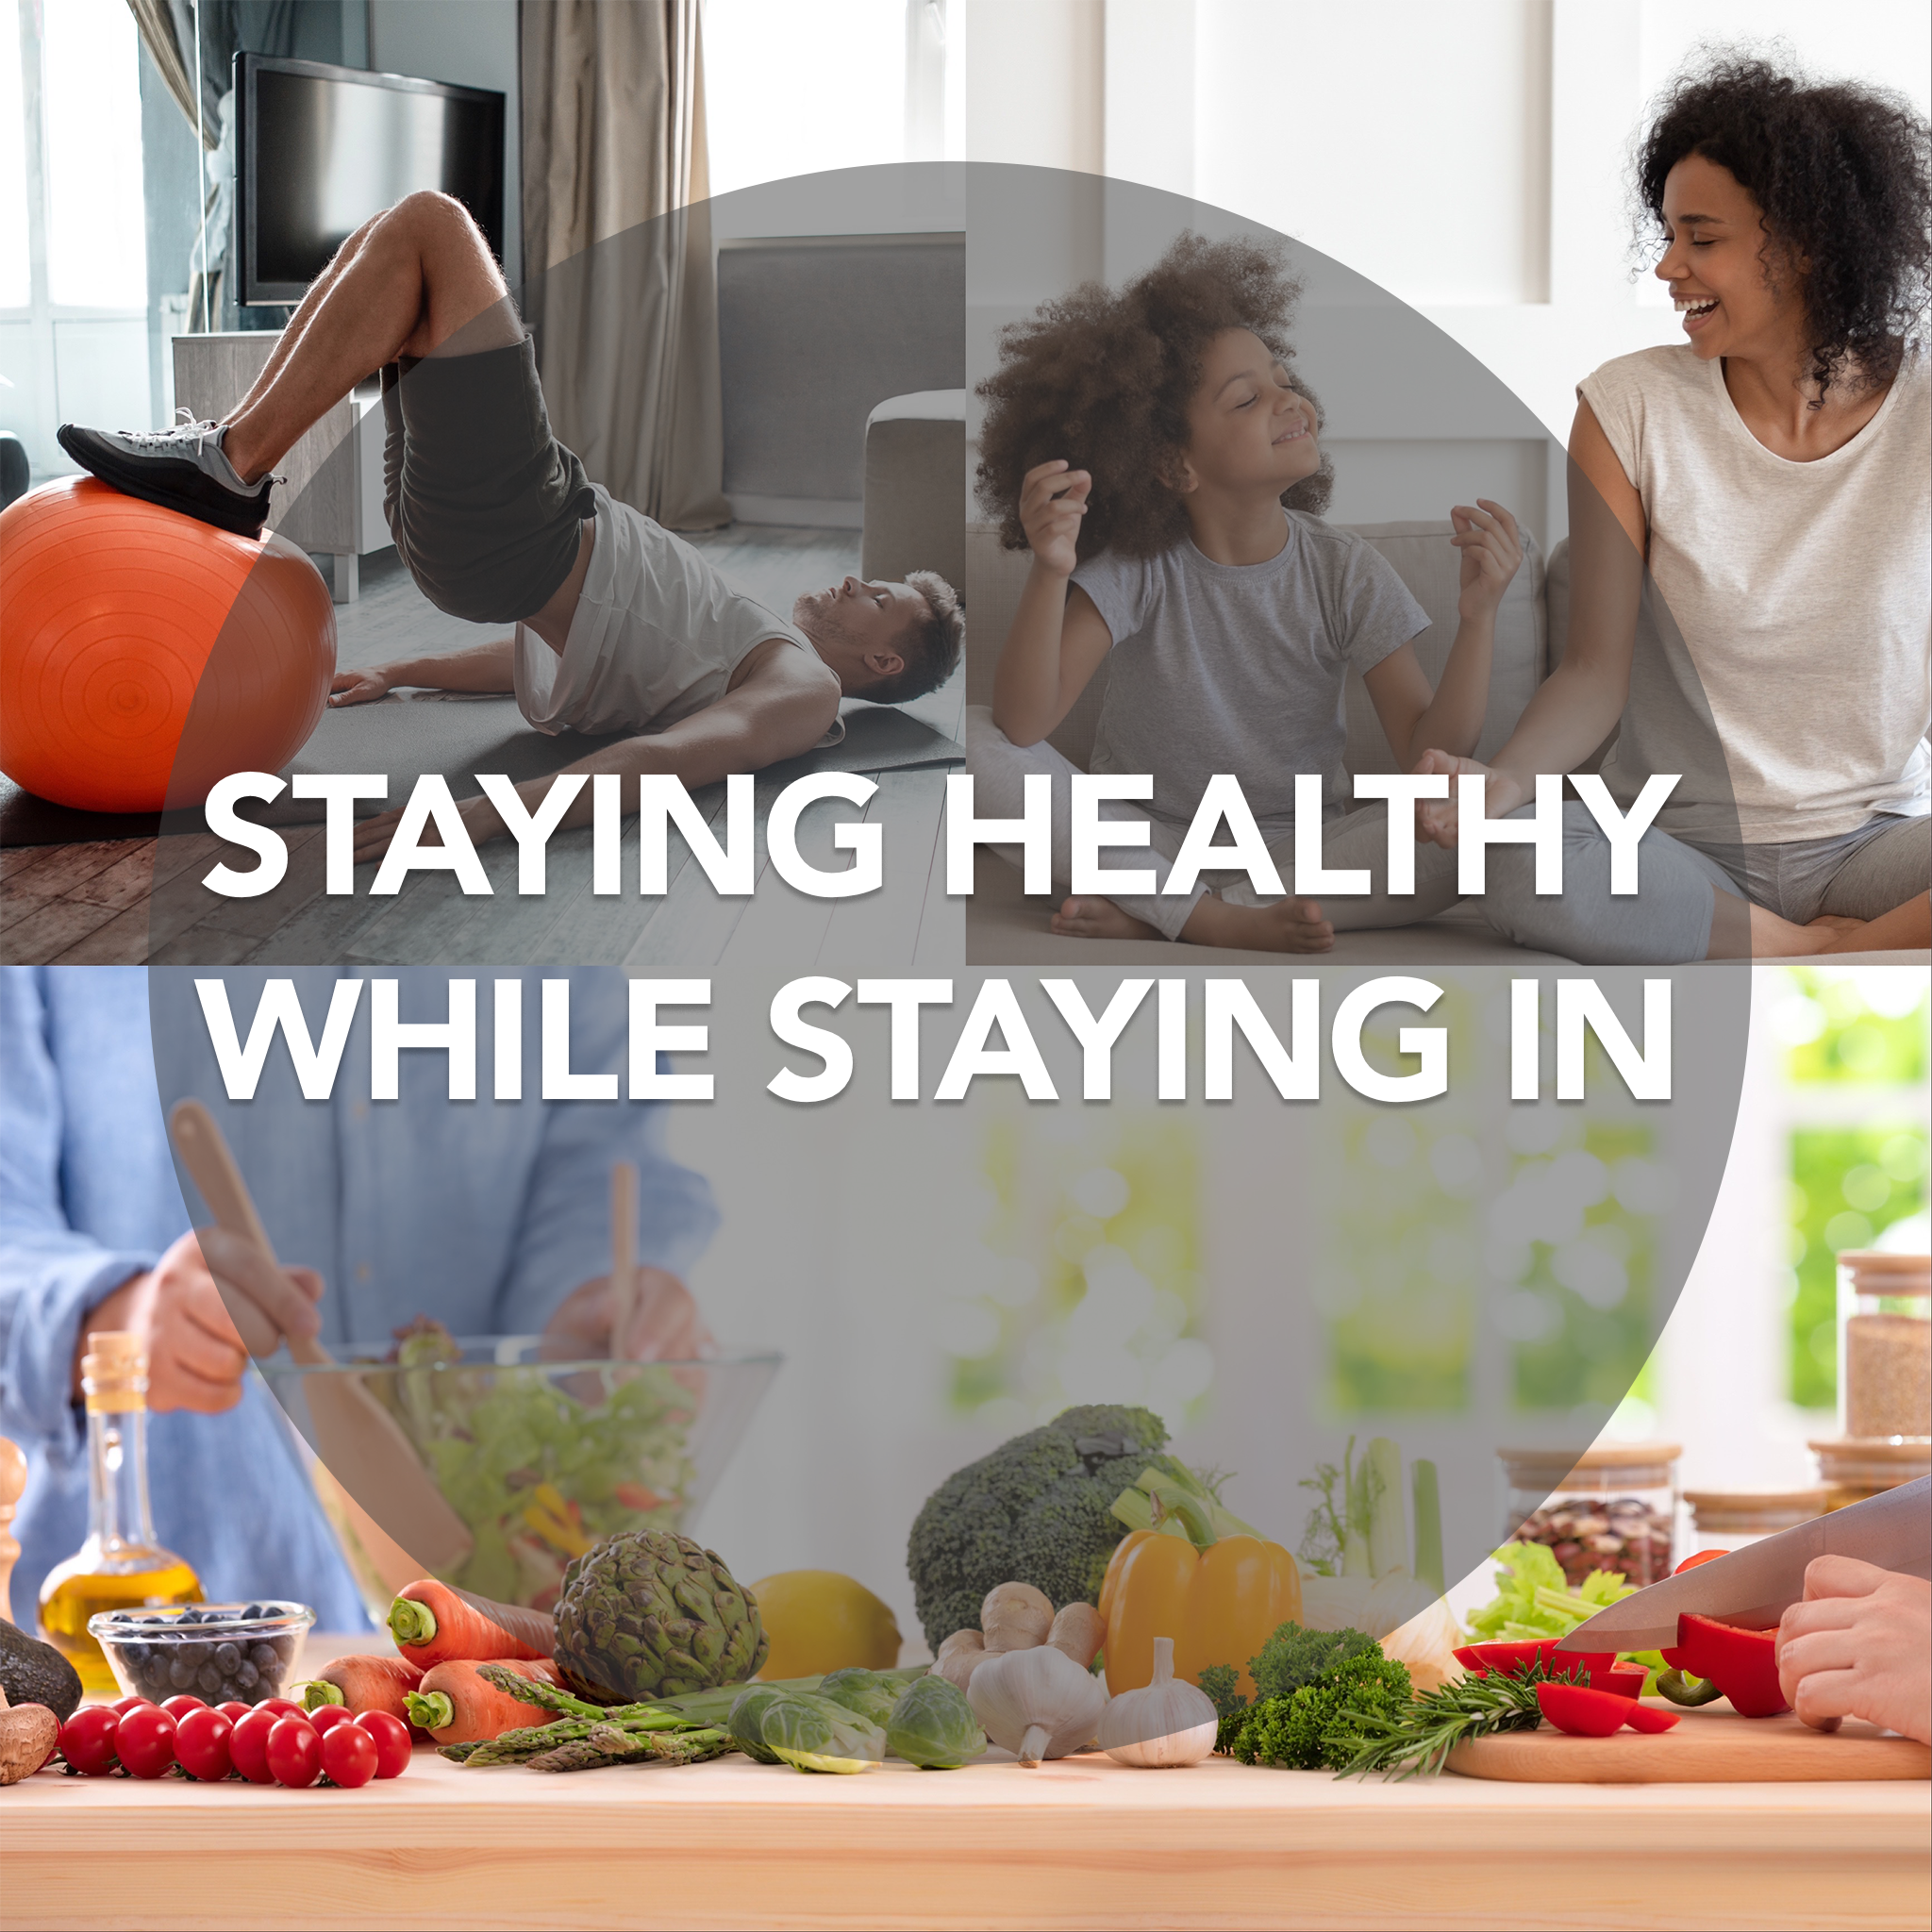 Staying Healthy While Staying In